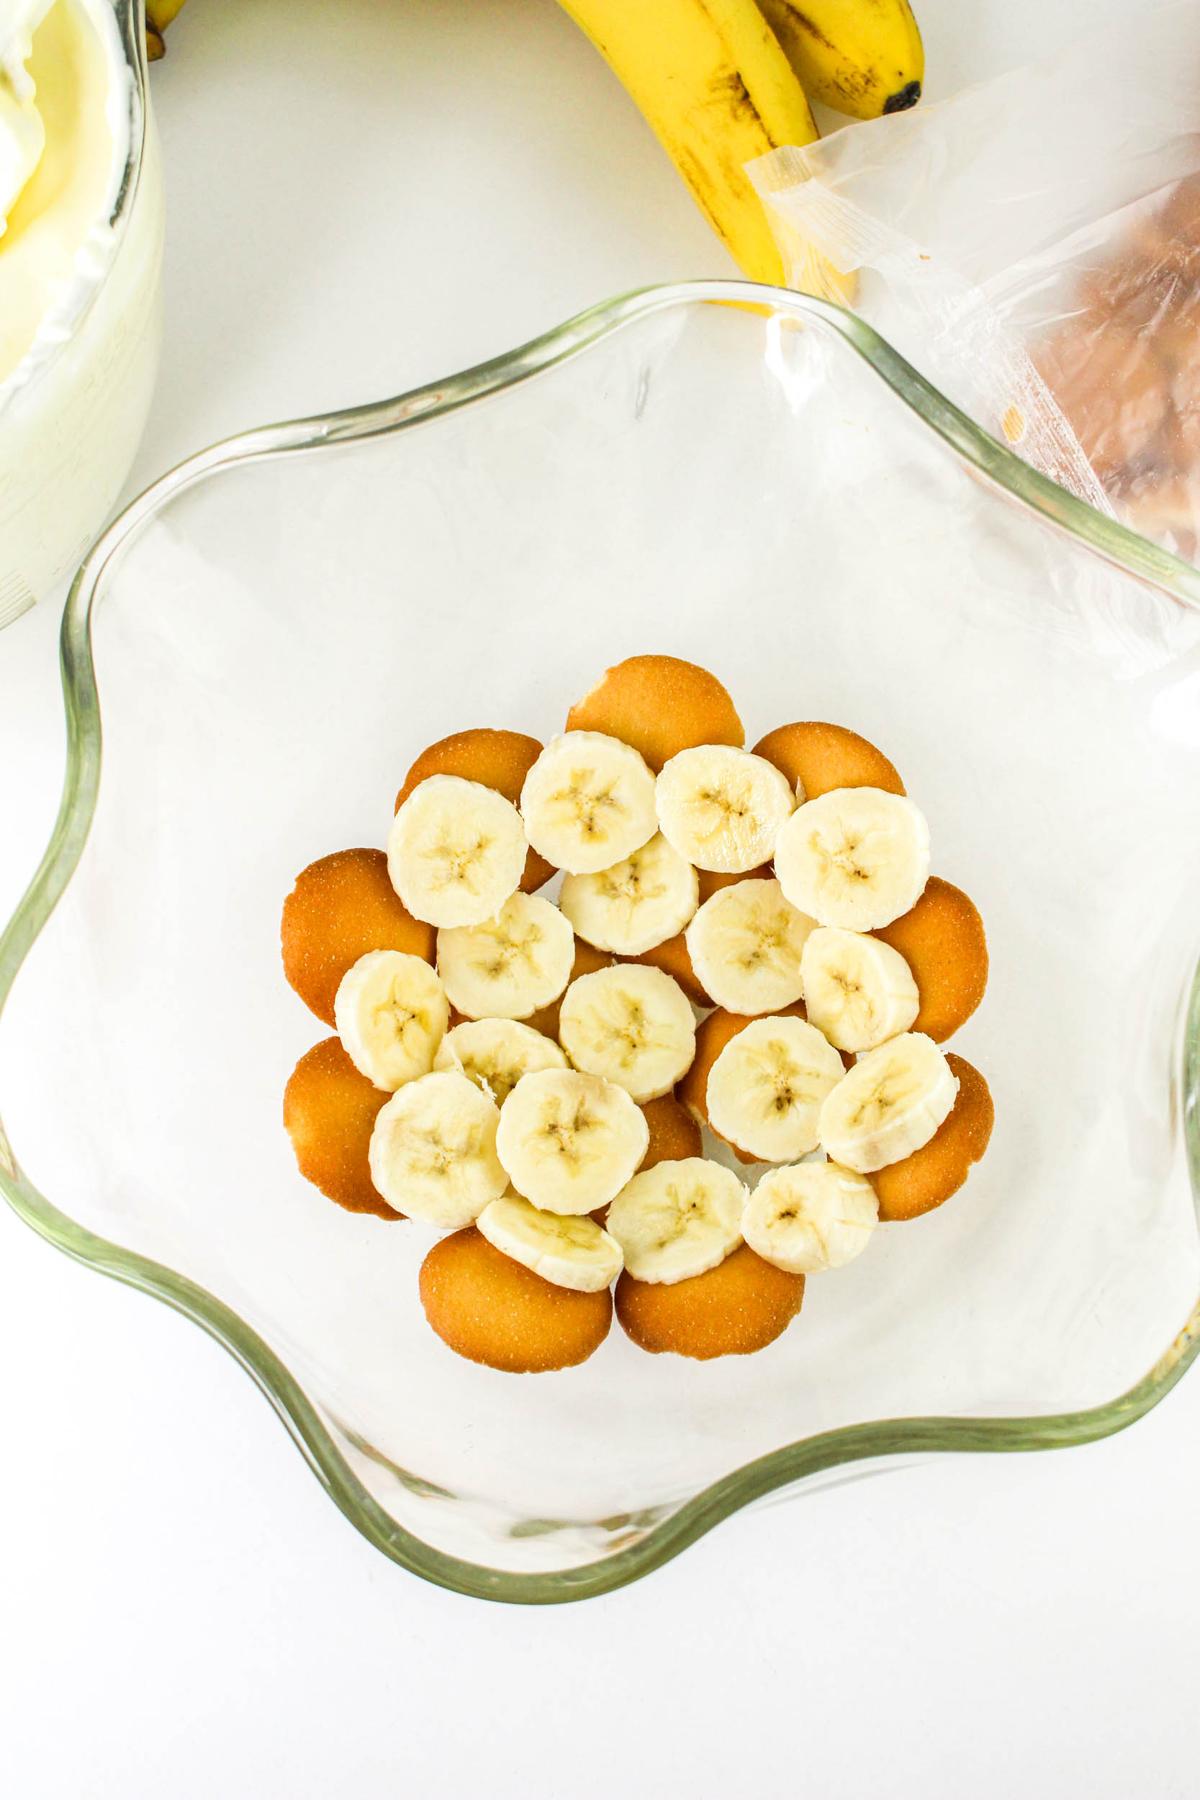 Top down view of sliced bananas in bowl.